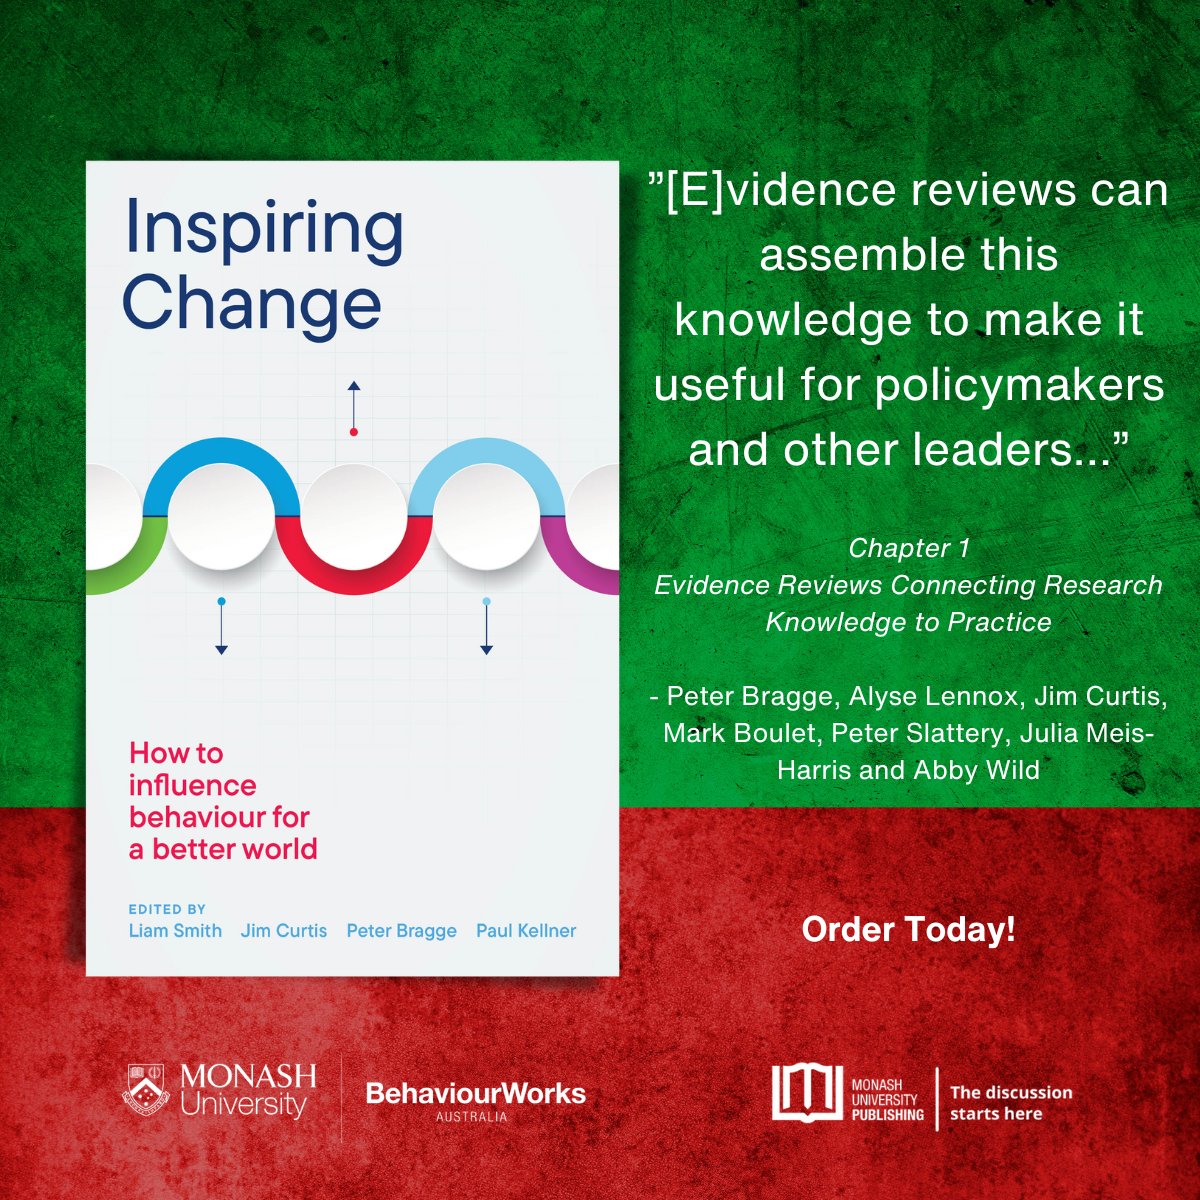 Systematic. Rapid. Narrative. These are all type of evidence reviews explored in Chapter 1 of 'Inspiring Change: How to influence behaviour for a better world'. Available for order at @MonashPub: publishing.monash.edu/product/inspir…